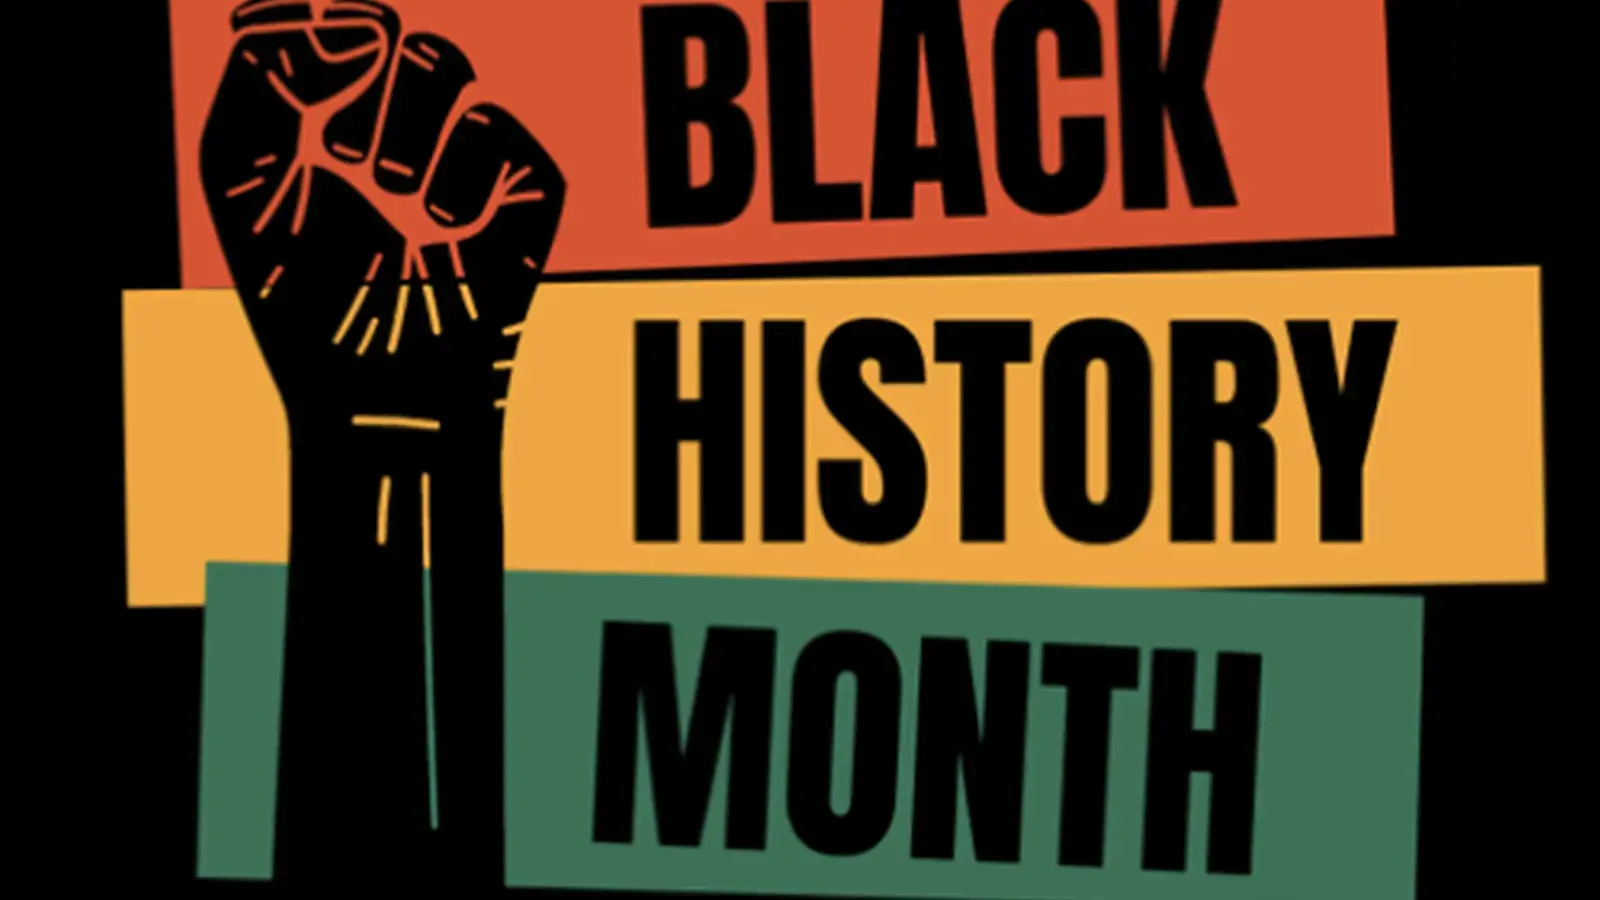 How to celebrate Black History Month at work